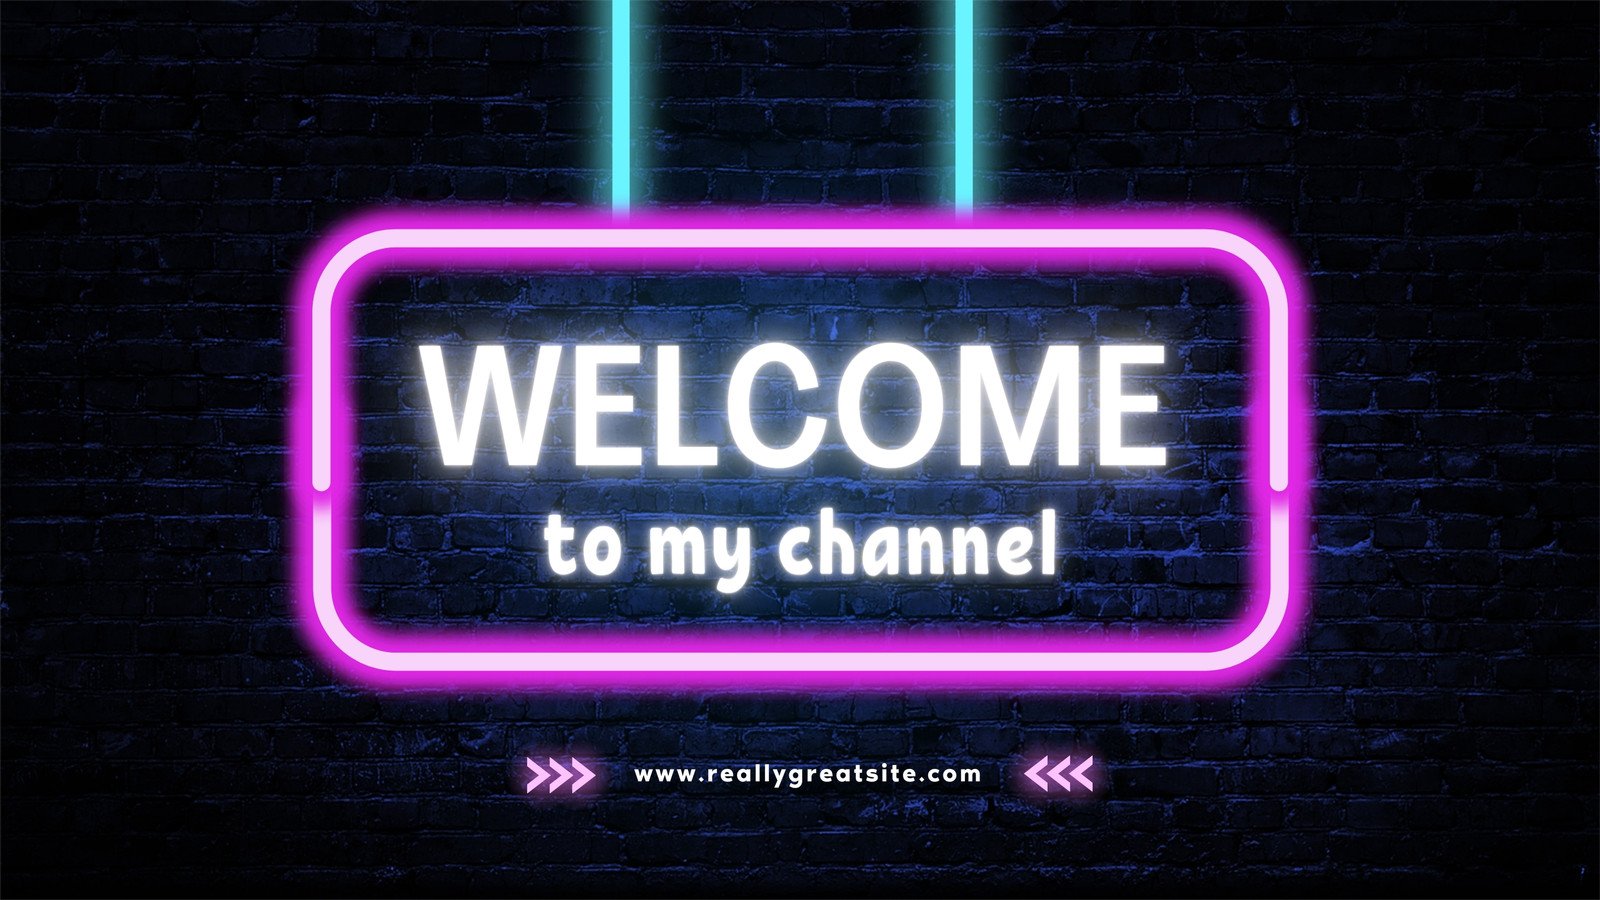 we are open neon sign animation video Template